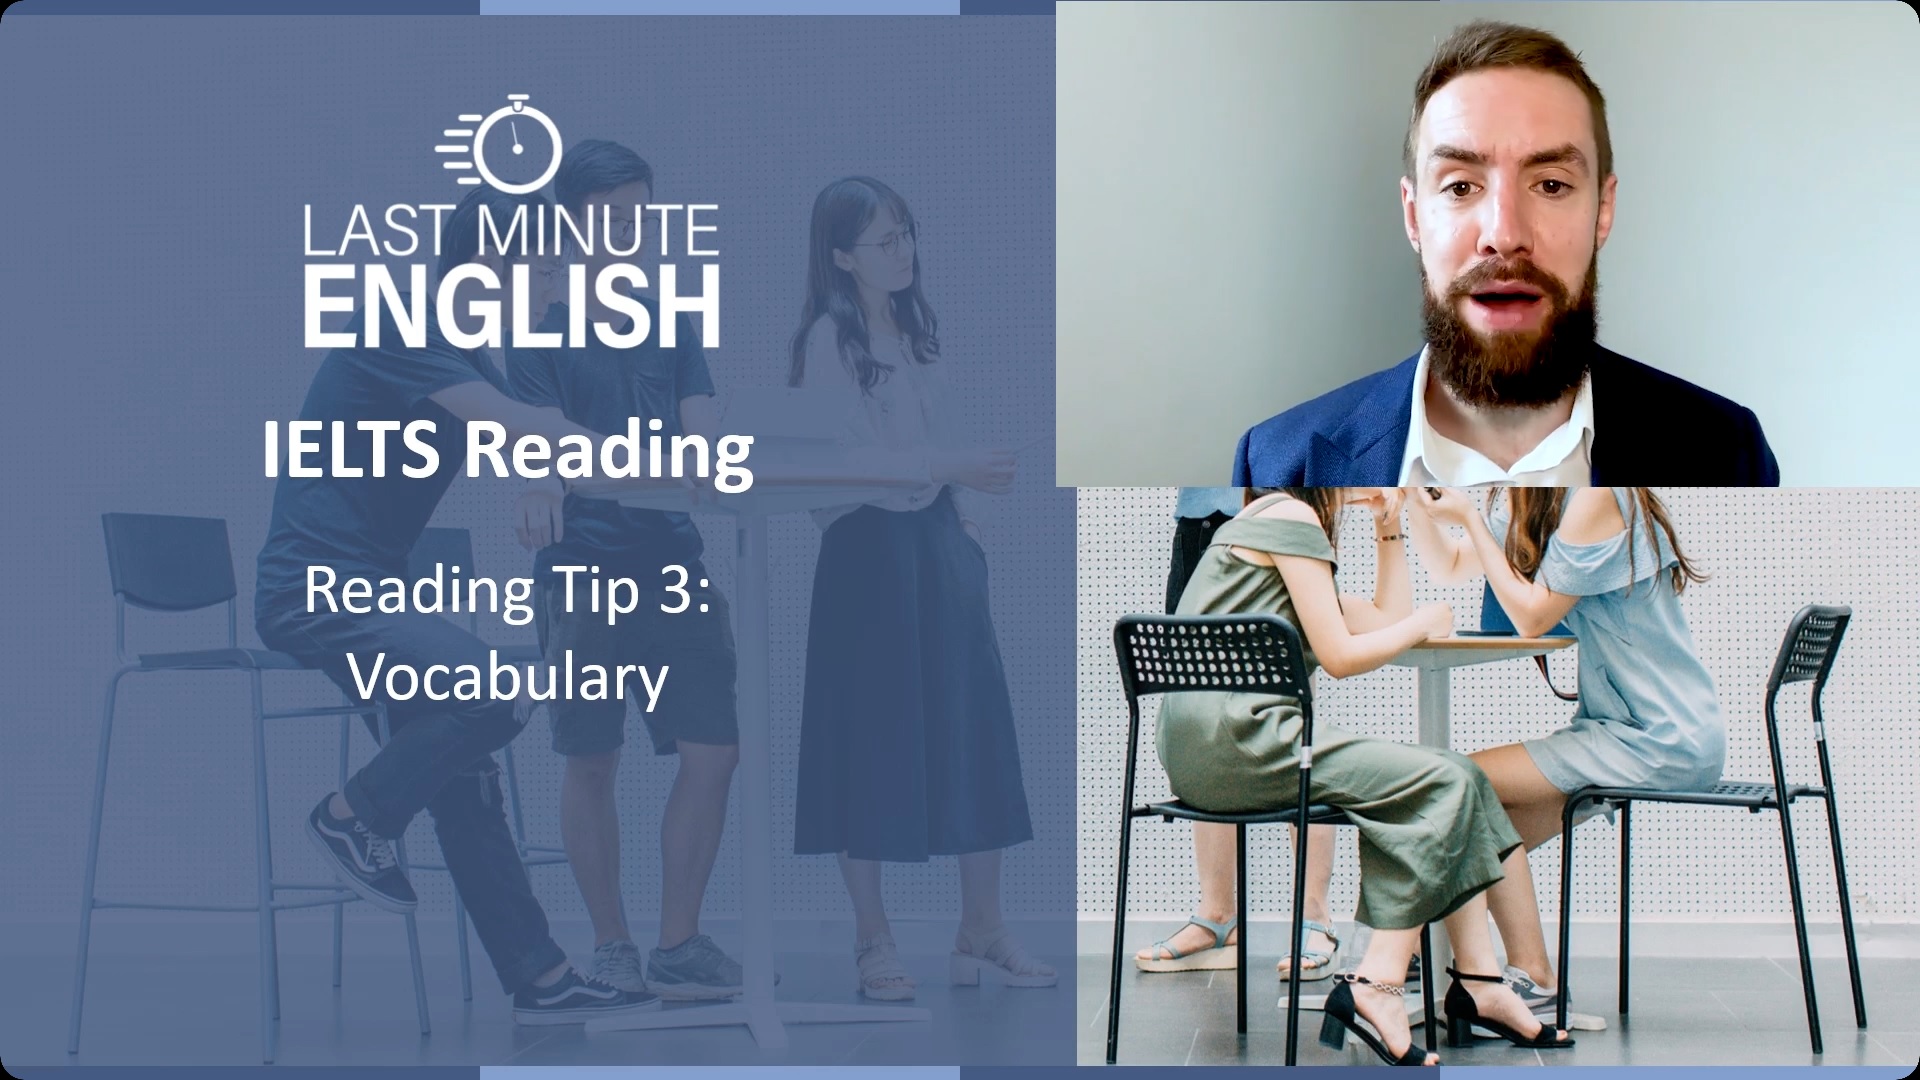 IELTS Reading - Tip 3A - Vocabulary